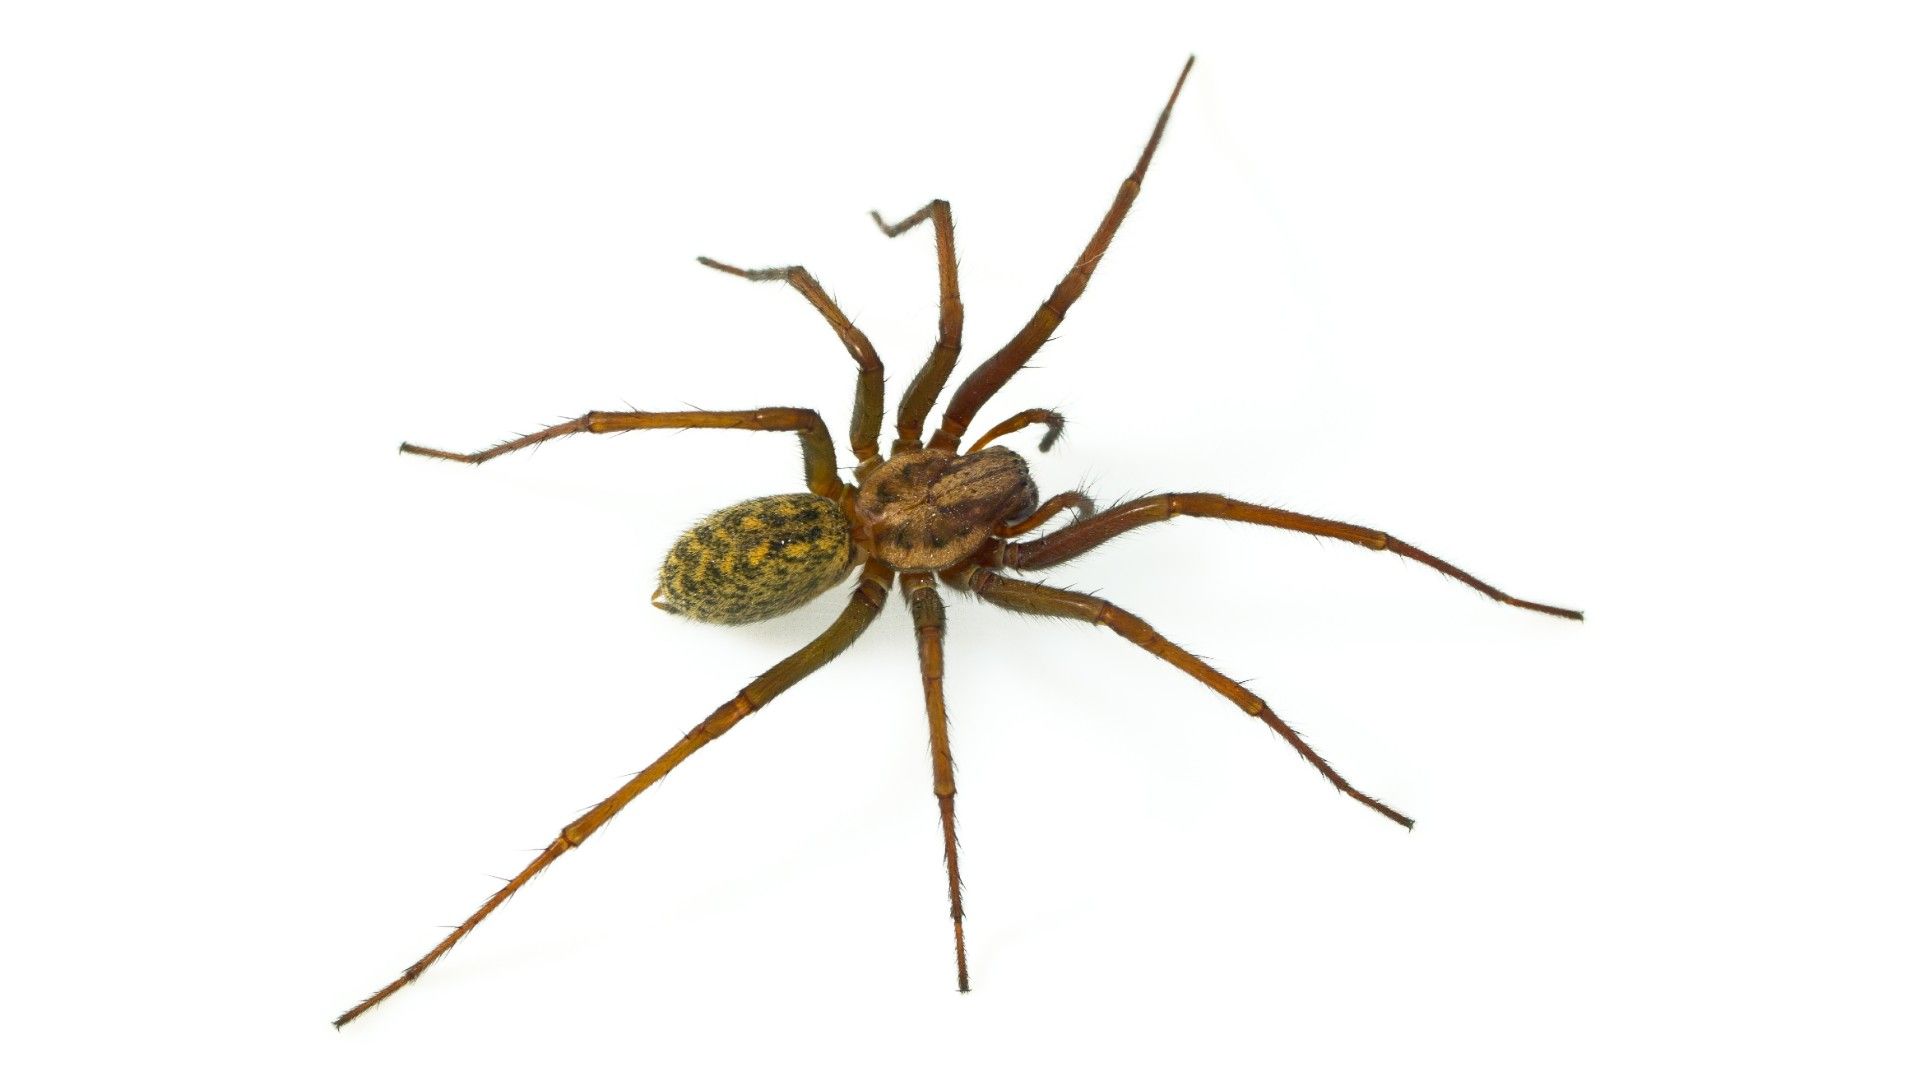 <p>                     Part of the family of spiders known as the funnel web spiders, the hobo spider (<em>Eratigena agrestis</em>, formerly <em>Tegenaria agrestis</em>) can be recognized by it's light to medium brown coloring and the multiple chevron patterns (v-shaped) on its abdomen pointing toward their head. They are often confused with the brown recluse spider (and vice versa), but the brown recluse is much more dangerous to humans. While hobo spiders have been known to bite if they feel threatened, there is much debate about how venomous they actually are. So much so that the Center for Disease Control and Prevention has removed them from their venomous spiders list. However, it's still wise to be cautious as hobo spider bites result in swelling and redness around the area, and can have more severe effects in young children.                   </p>                                      <p>                     Hobo spiders are not great climbers, so you'll find their funnel-shaped webs at ground level. Geographically, they can be found in western North America, in the Pacific Northwest and Great Basin, as well as distributed throughout Europe to Central Asia.                   </p>